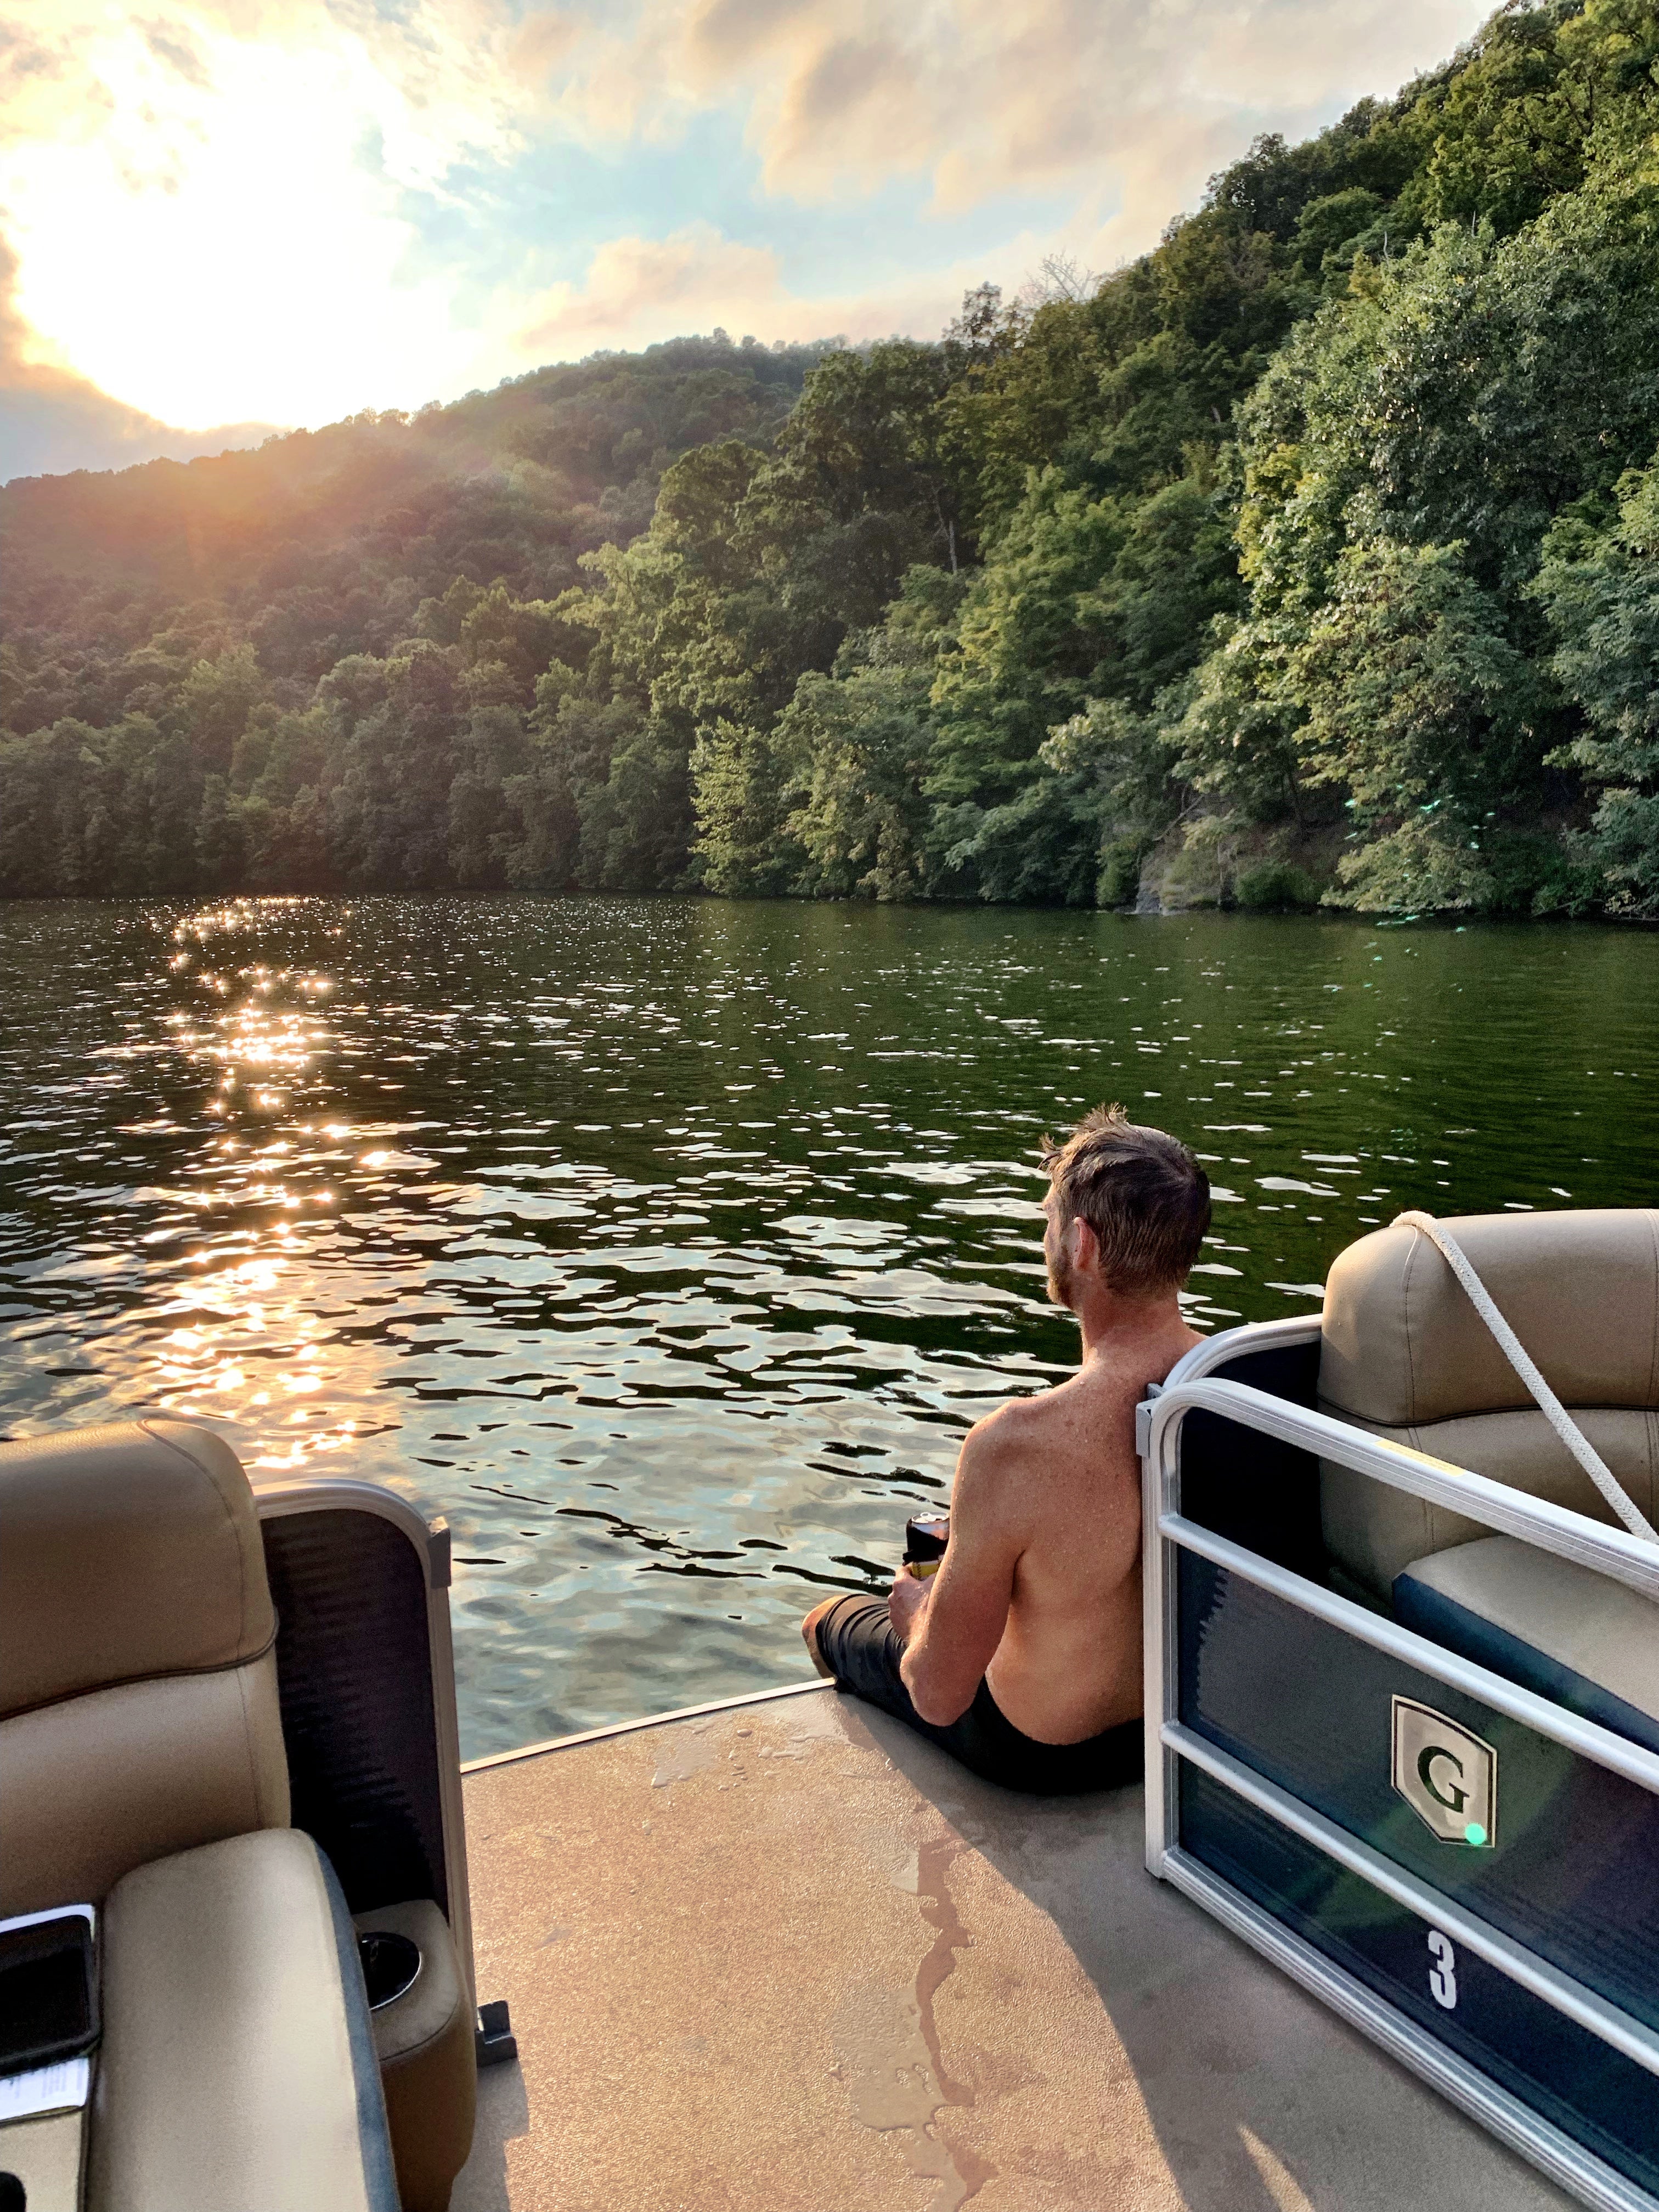 The Lake from a Pontoon Boat